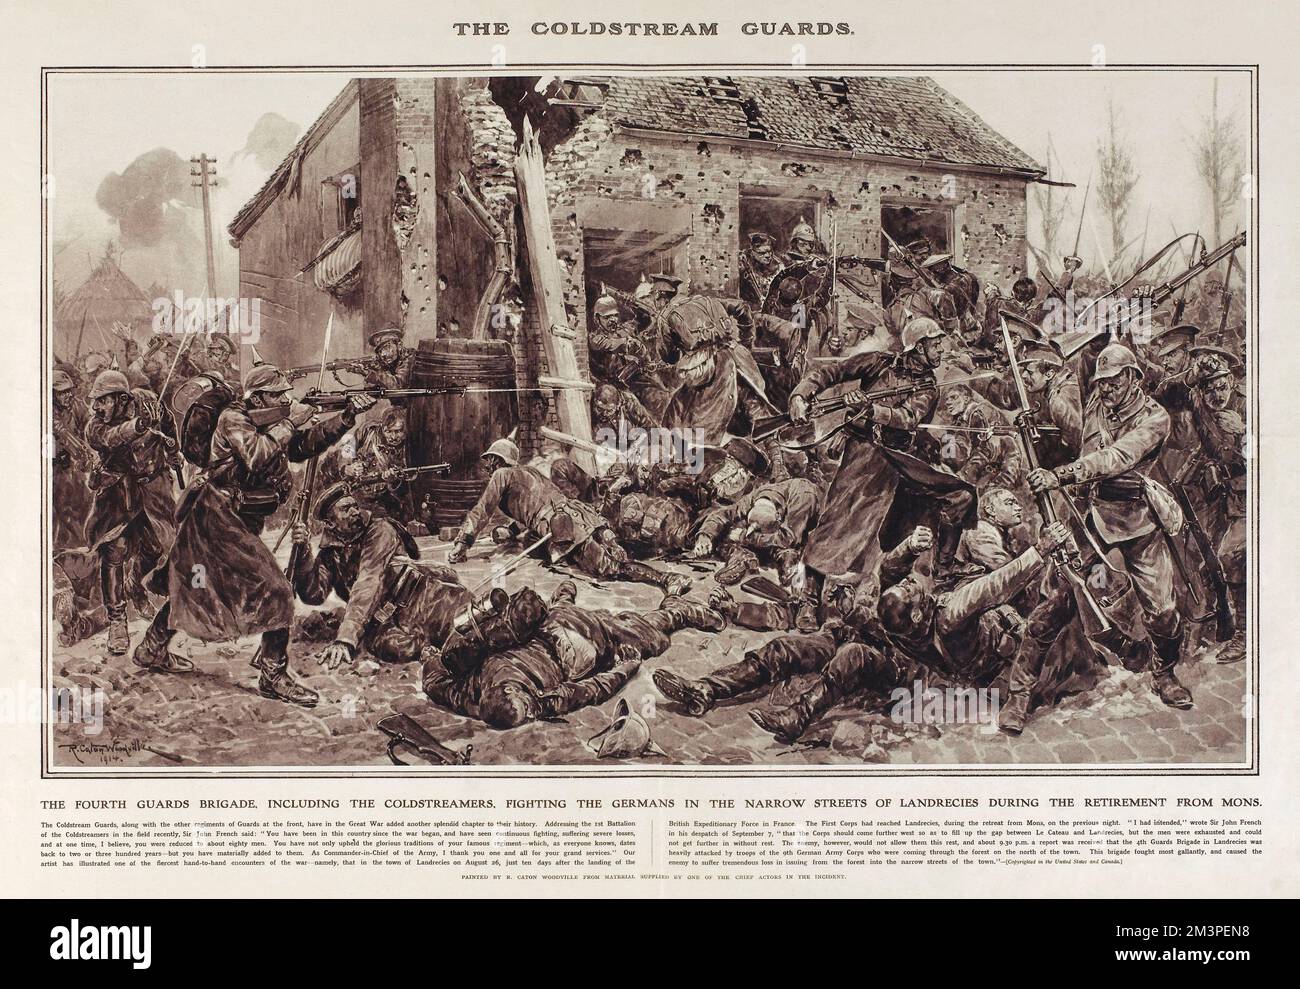 The Fourth Guards Brigade, including the Coldstream Guards, fighting the Germans in the narrow streets of Landrecies during the retreat from Mons.  Reproduction of a painting by R Caton Woodville in Great War Deeds, a special panorama supplement produced by the Illustrated London News in 1915, featuring heroic actions of the First World War.      Date: 1914 Stock Photo